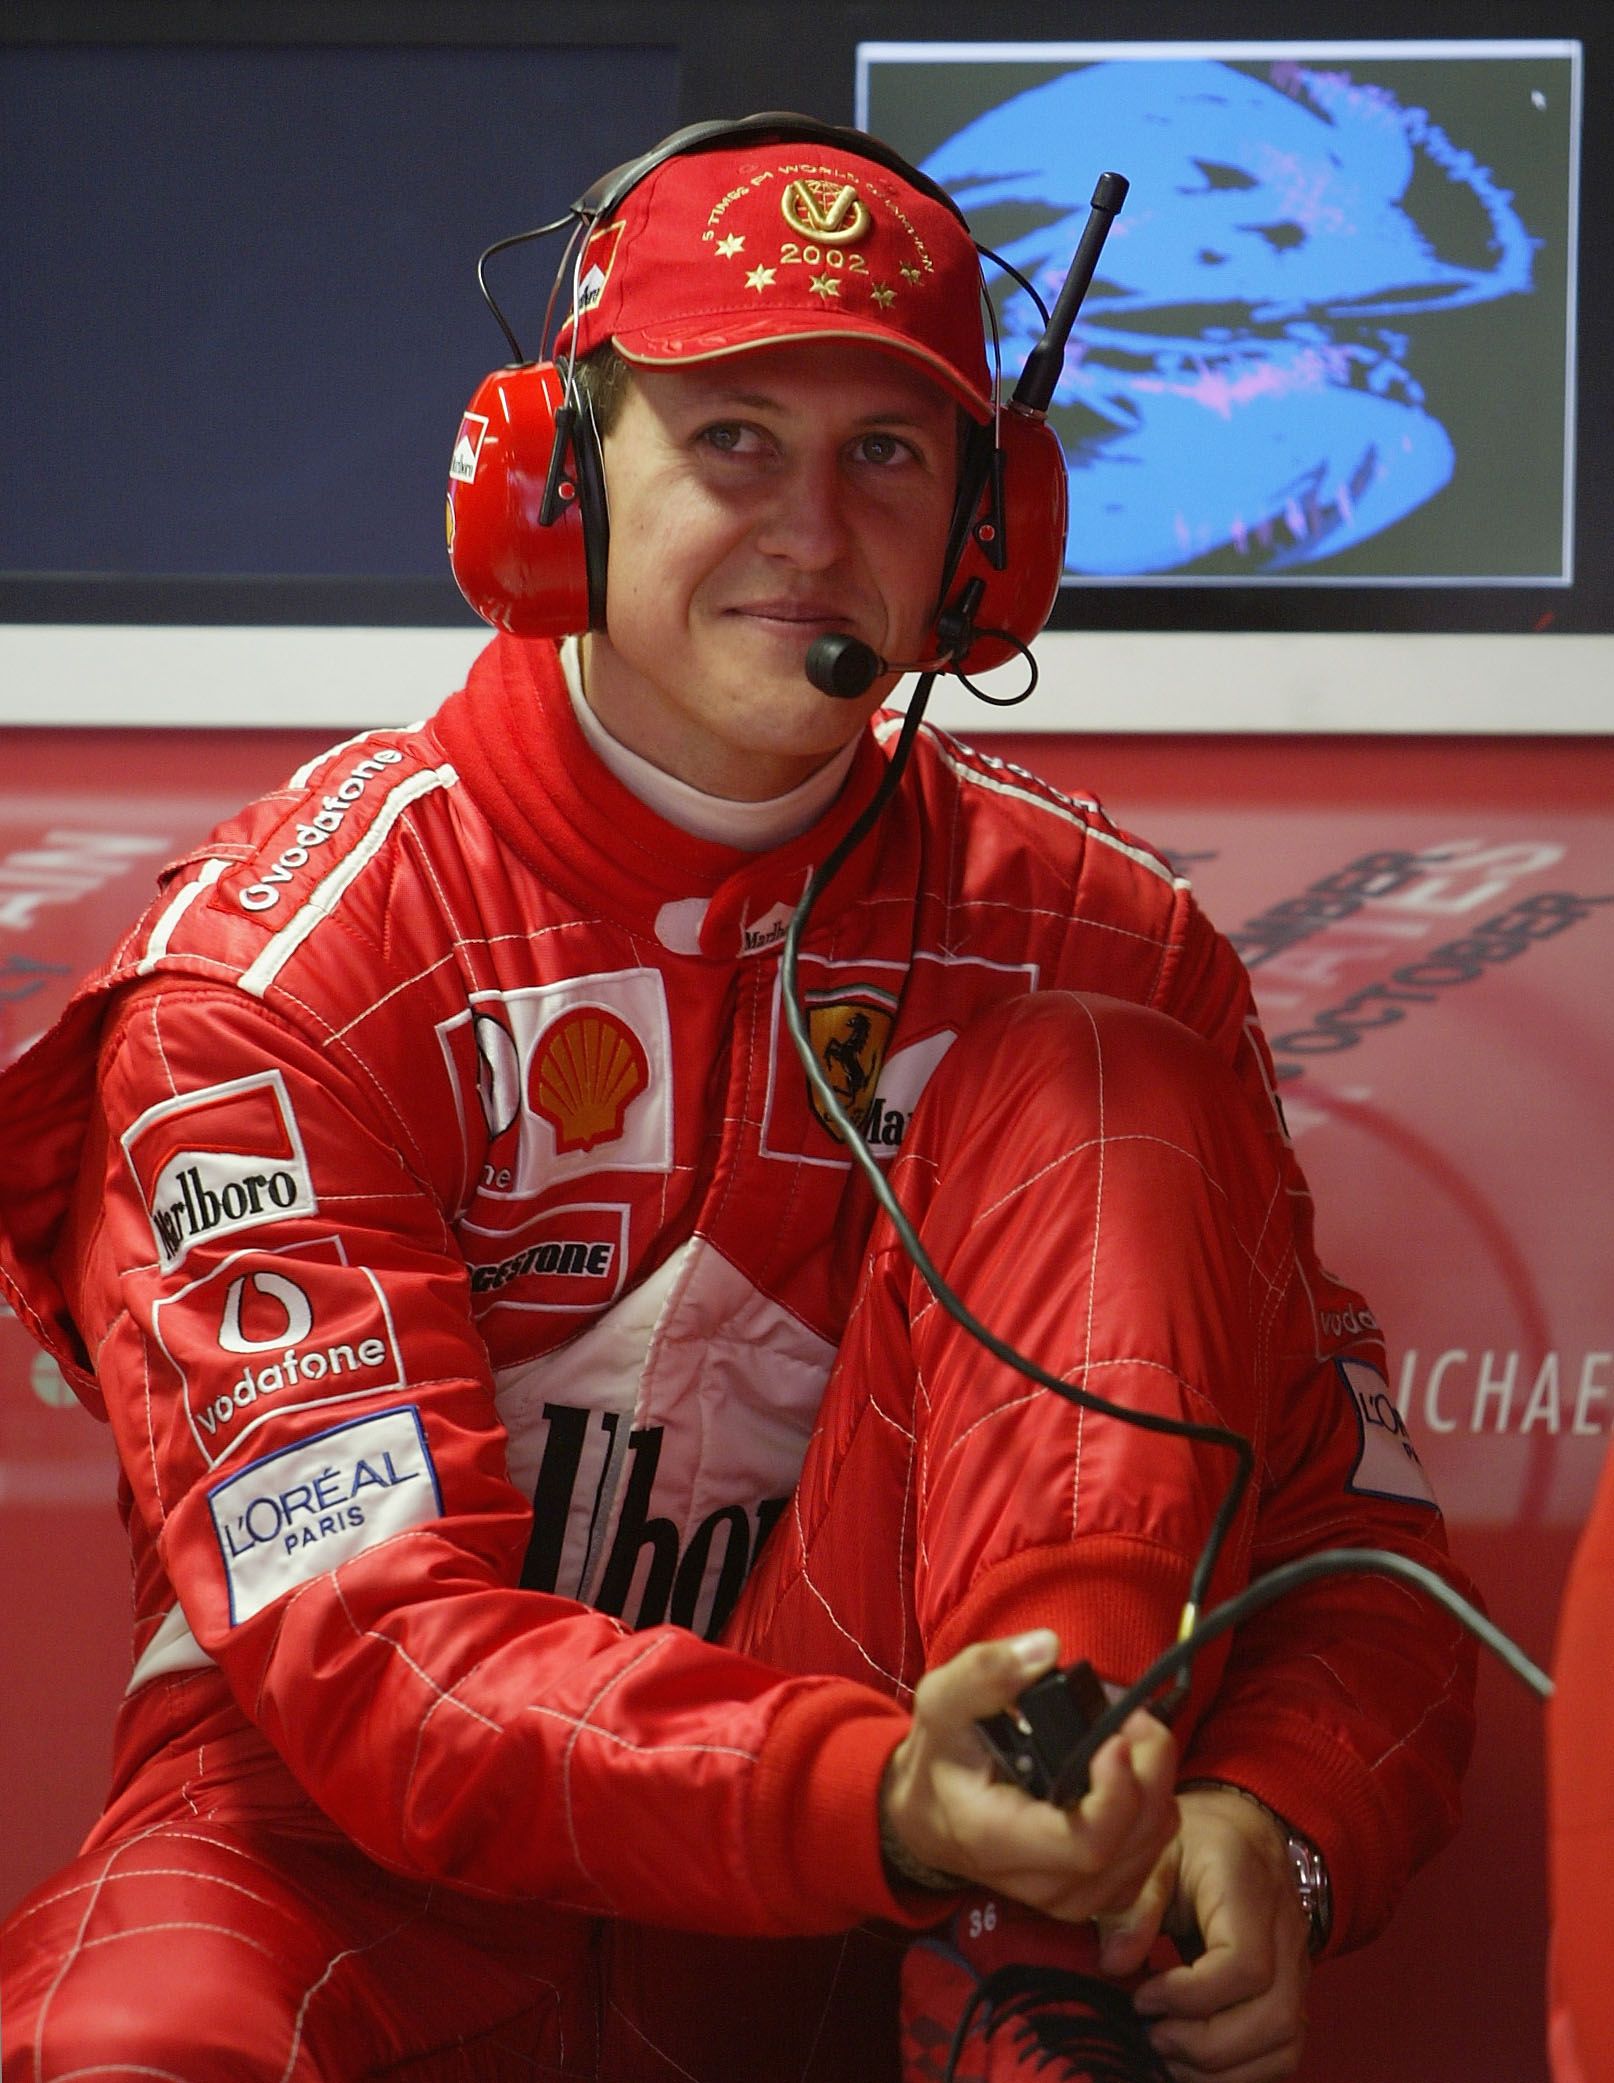 Michael Schumacher was unstoppable in 2002